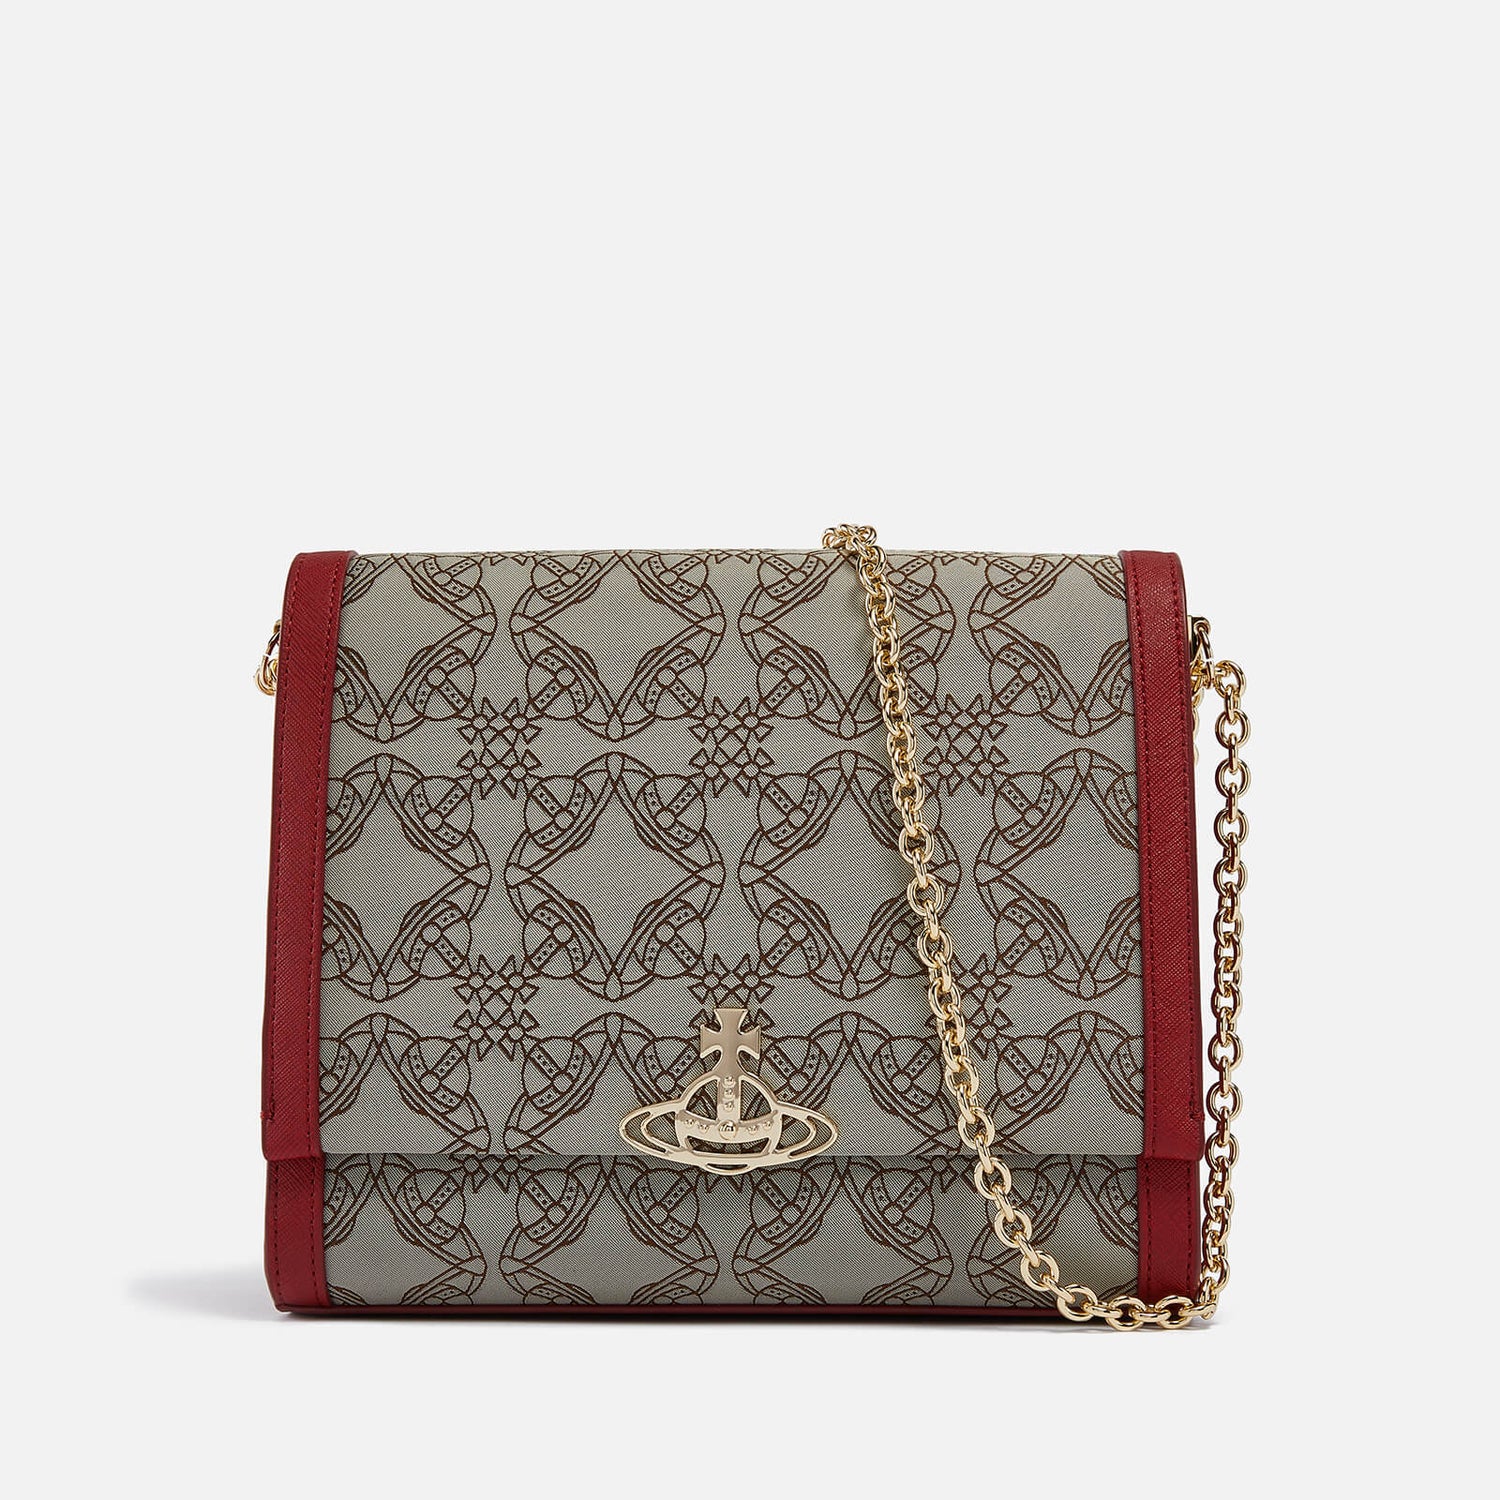 Vivienne Westwood Lucy Medium Jacquard and Faux Leather Bag